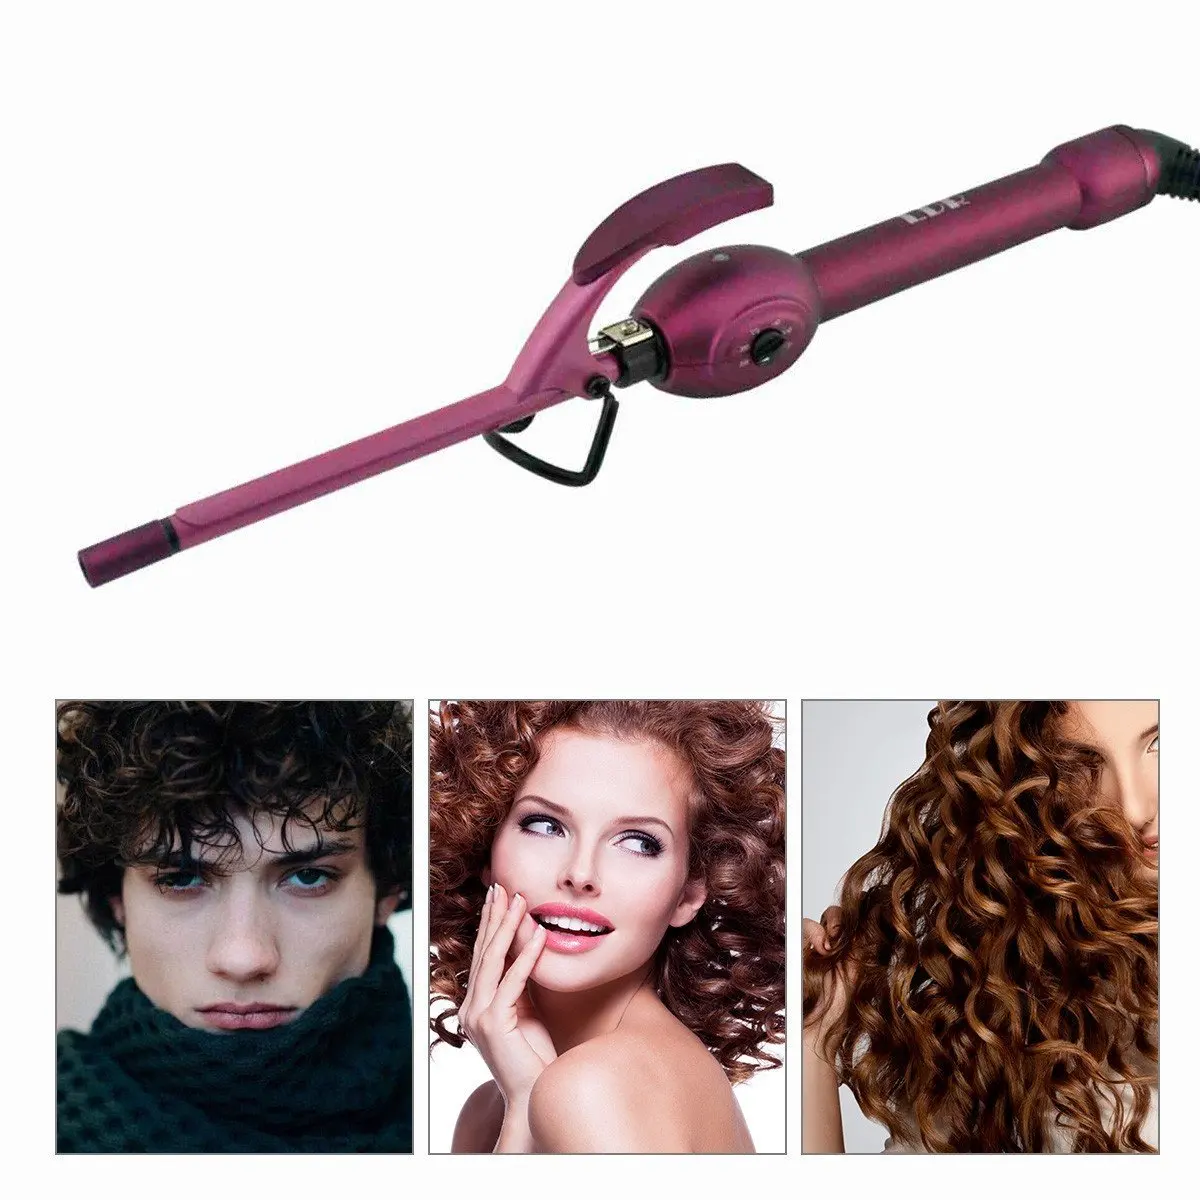 Cheap Hot Rollers For Short Hair Find Hot Rollers For Short Hair Deals On Line At Alibaba Com